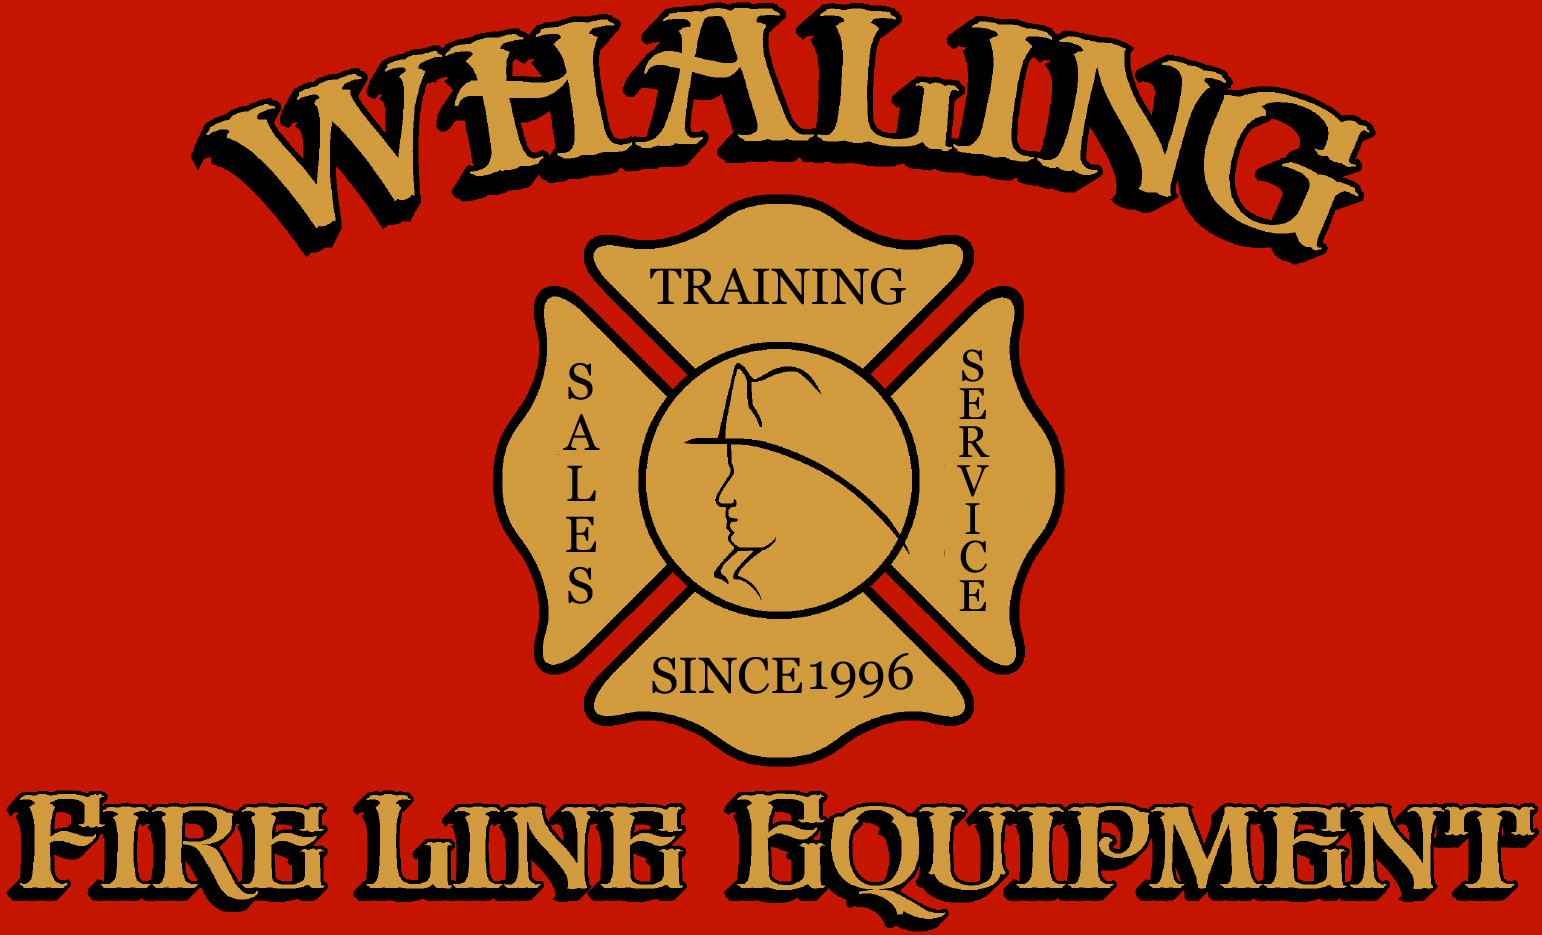 Whaleing Fire Line Equiptment